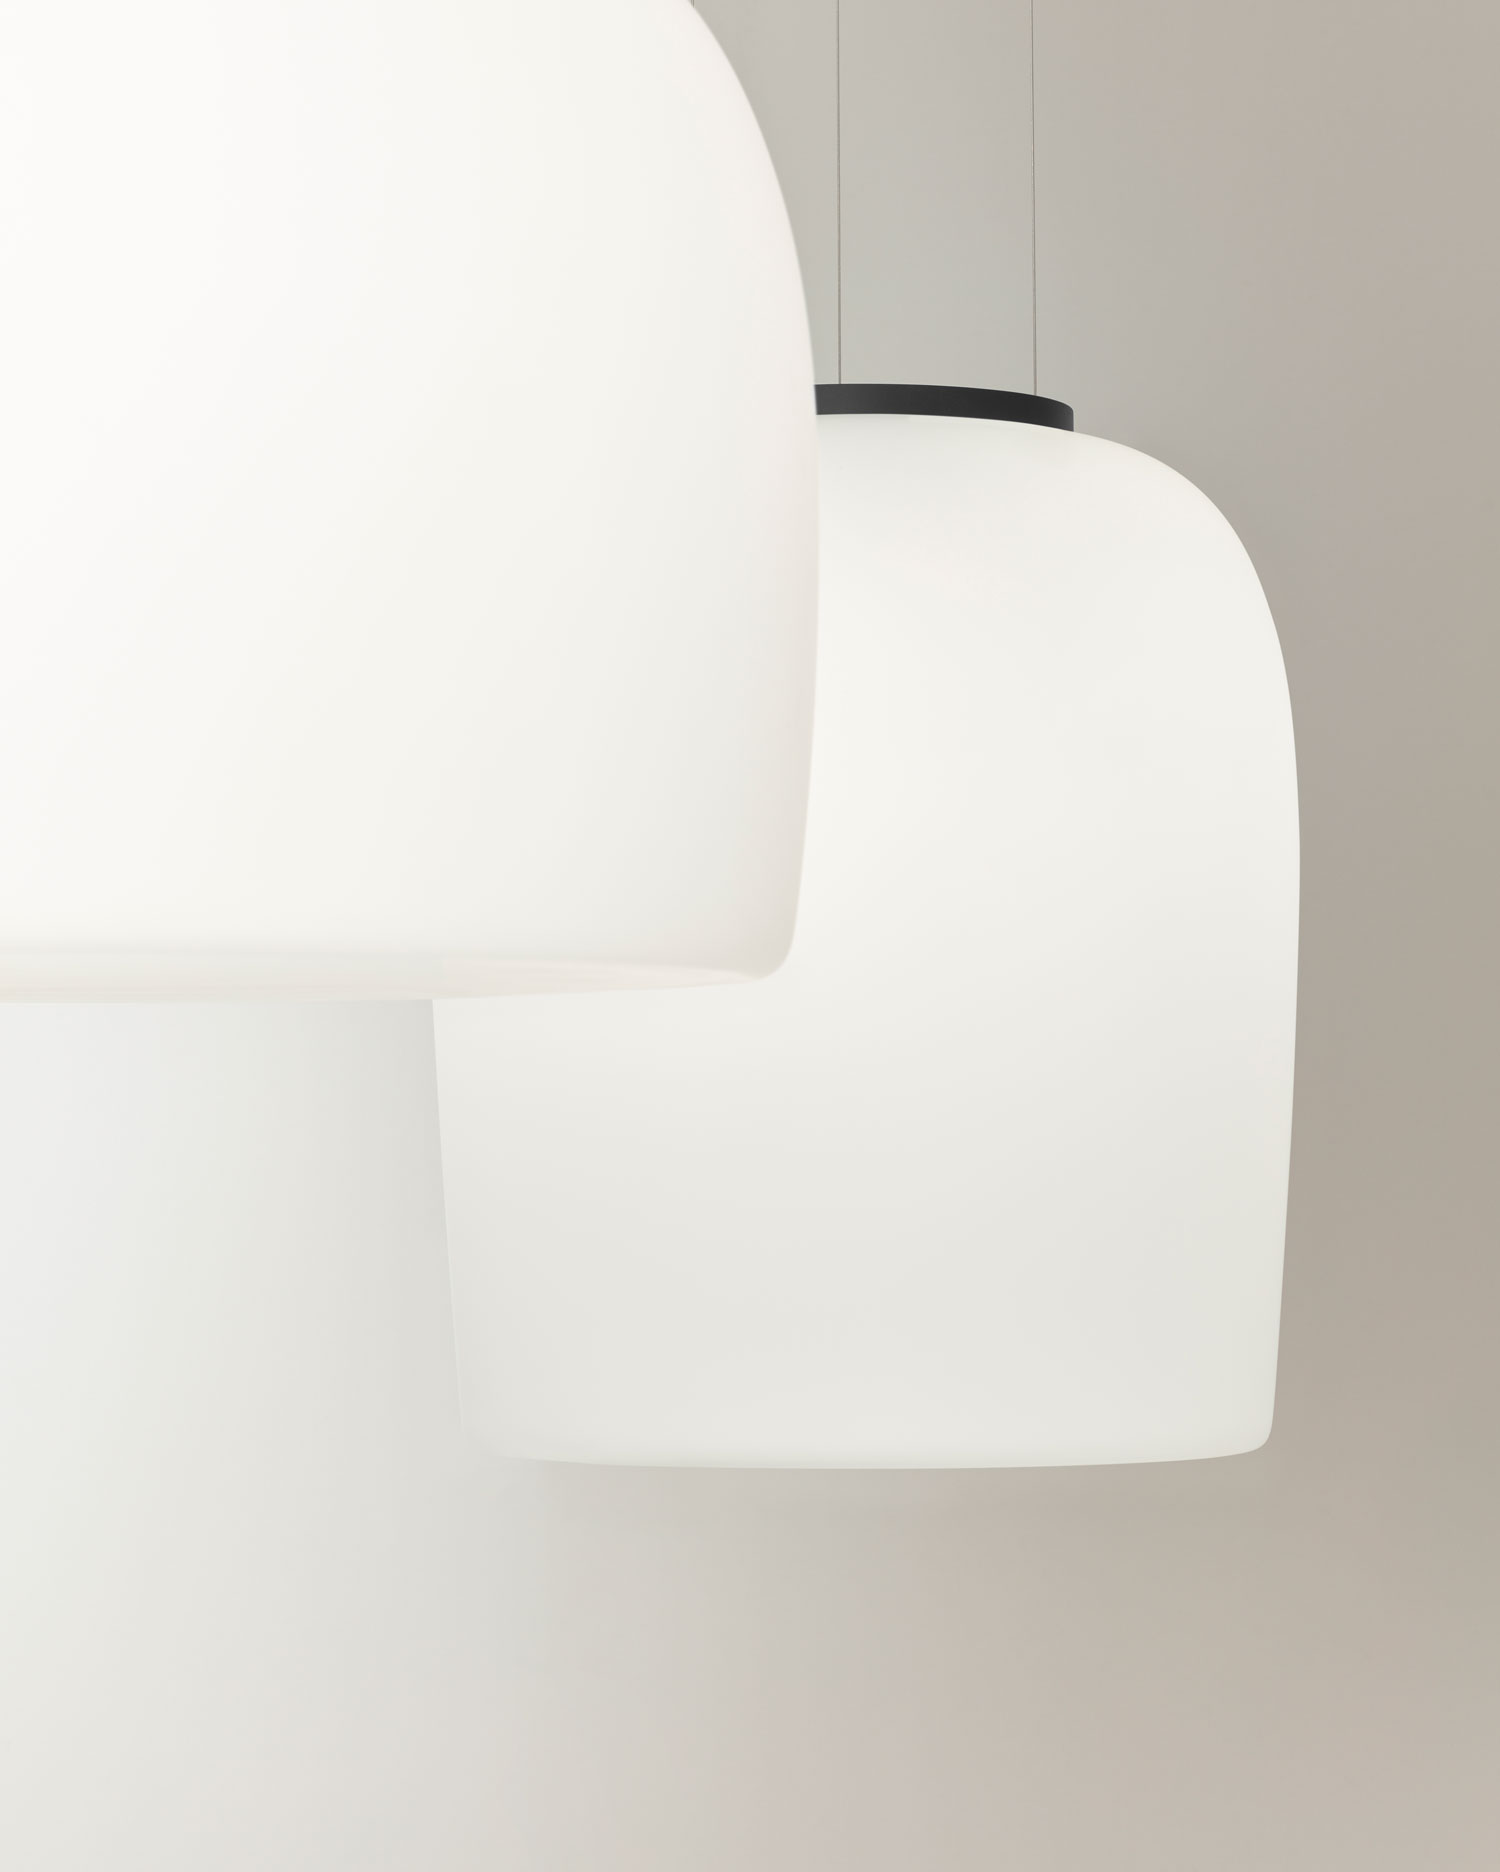 Vibia The Edit - An Ethereal Presence: Introducing Vibia’s Ghost Collection